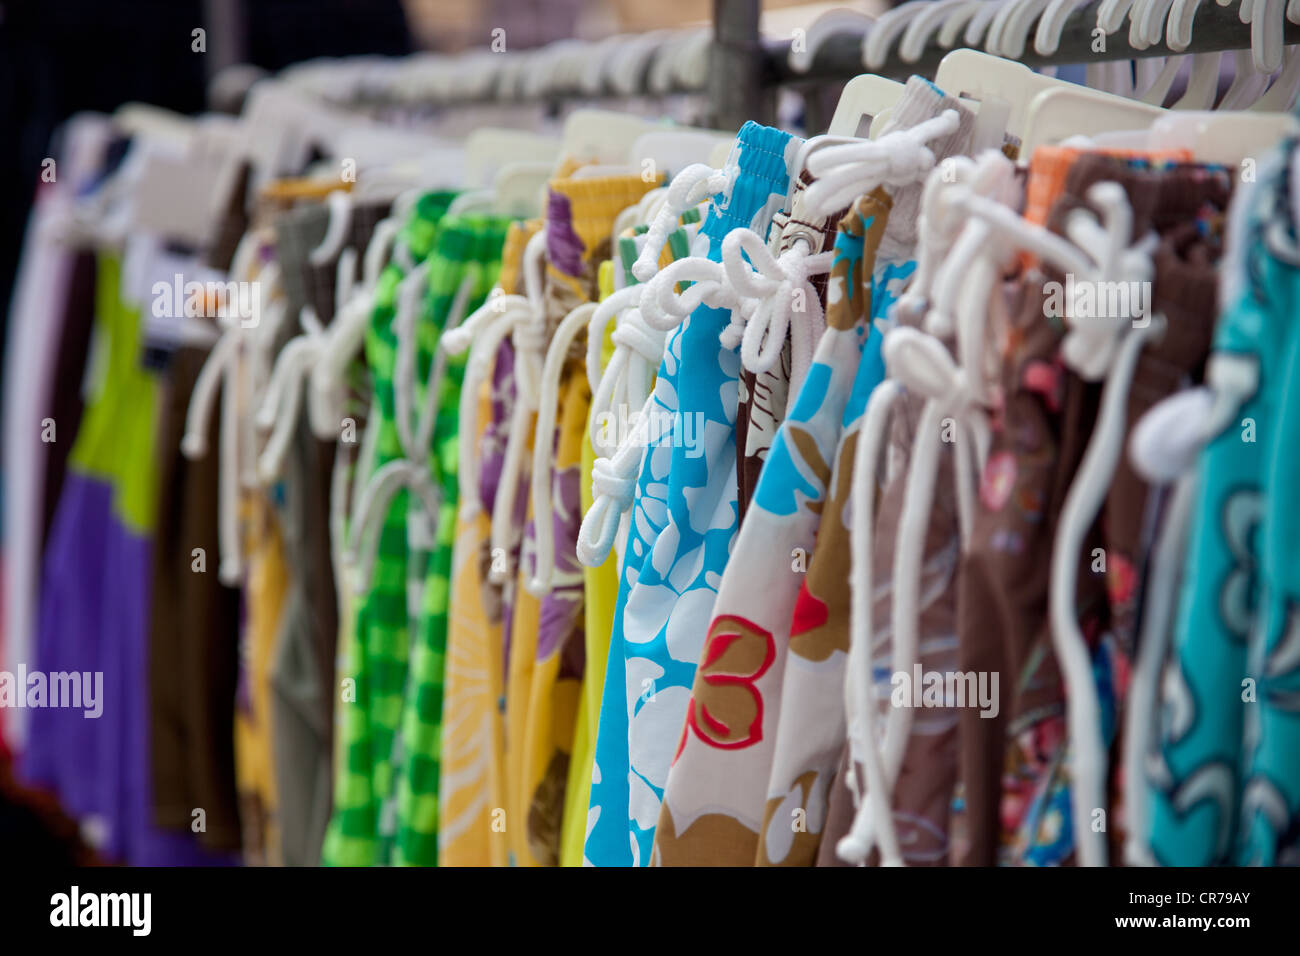 Market stall offering bathing suits. Stock Photo